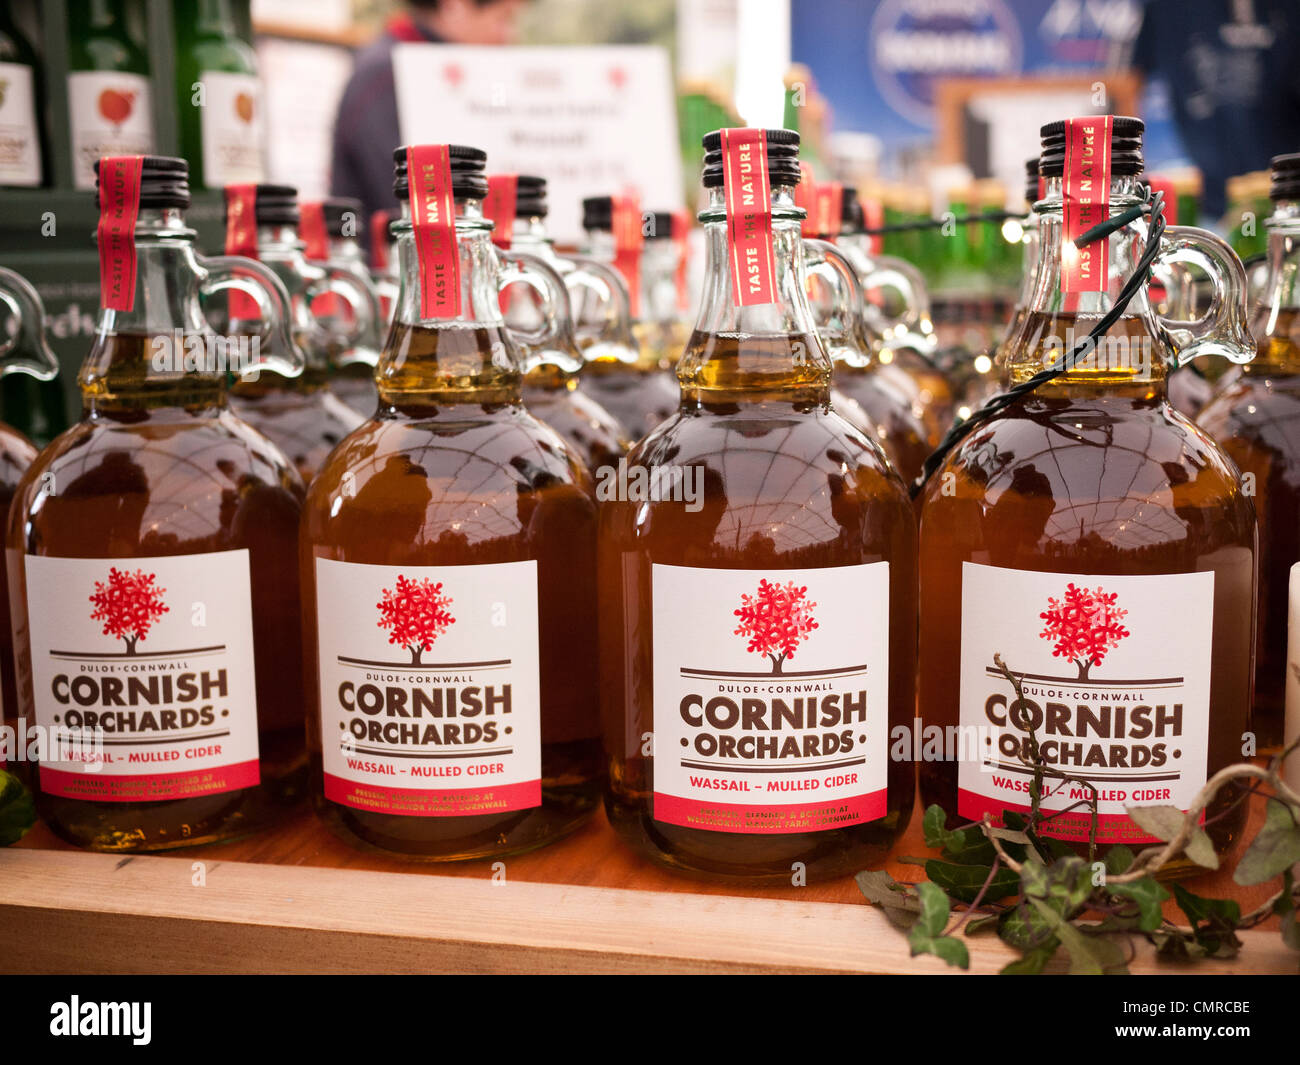 Cornwall, UK - Cornish Orchards apple juices and ciders bottles on display at market. Stock Photo